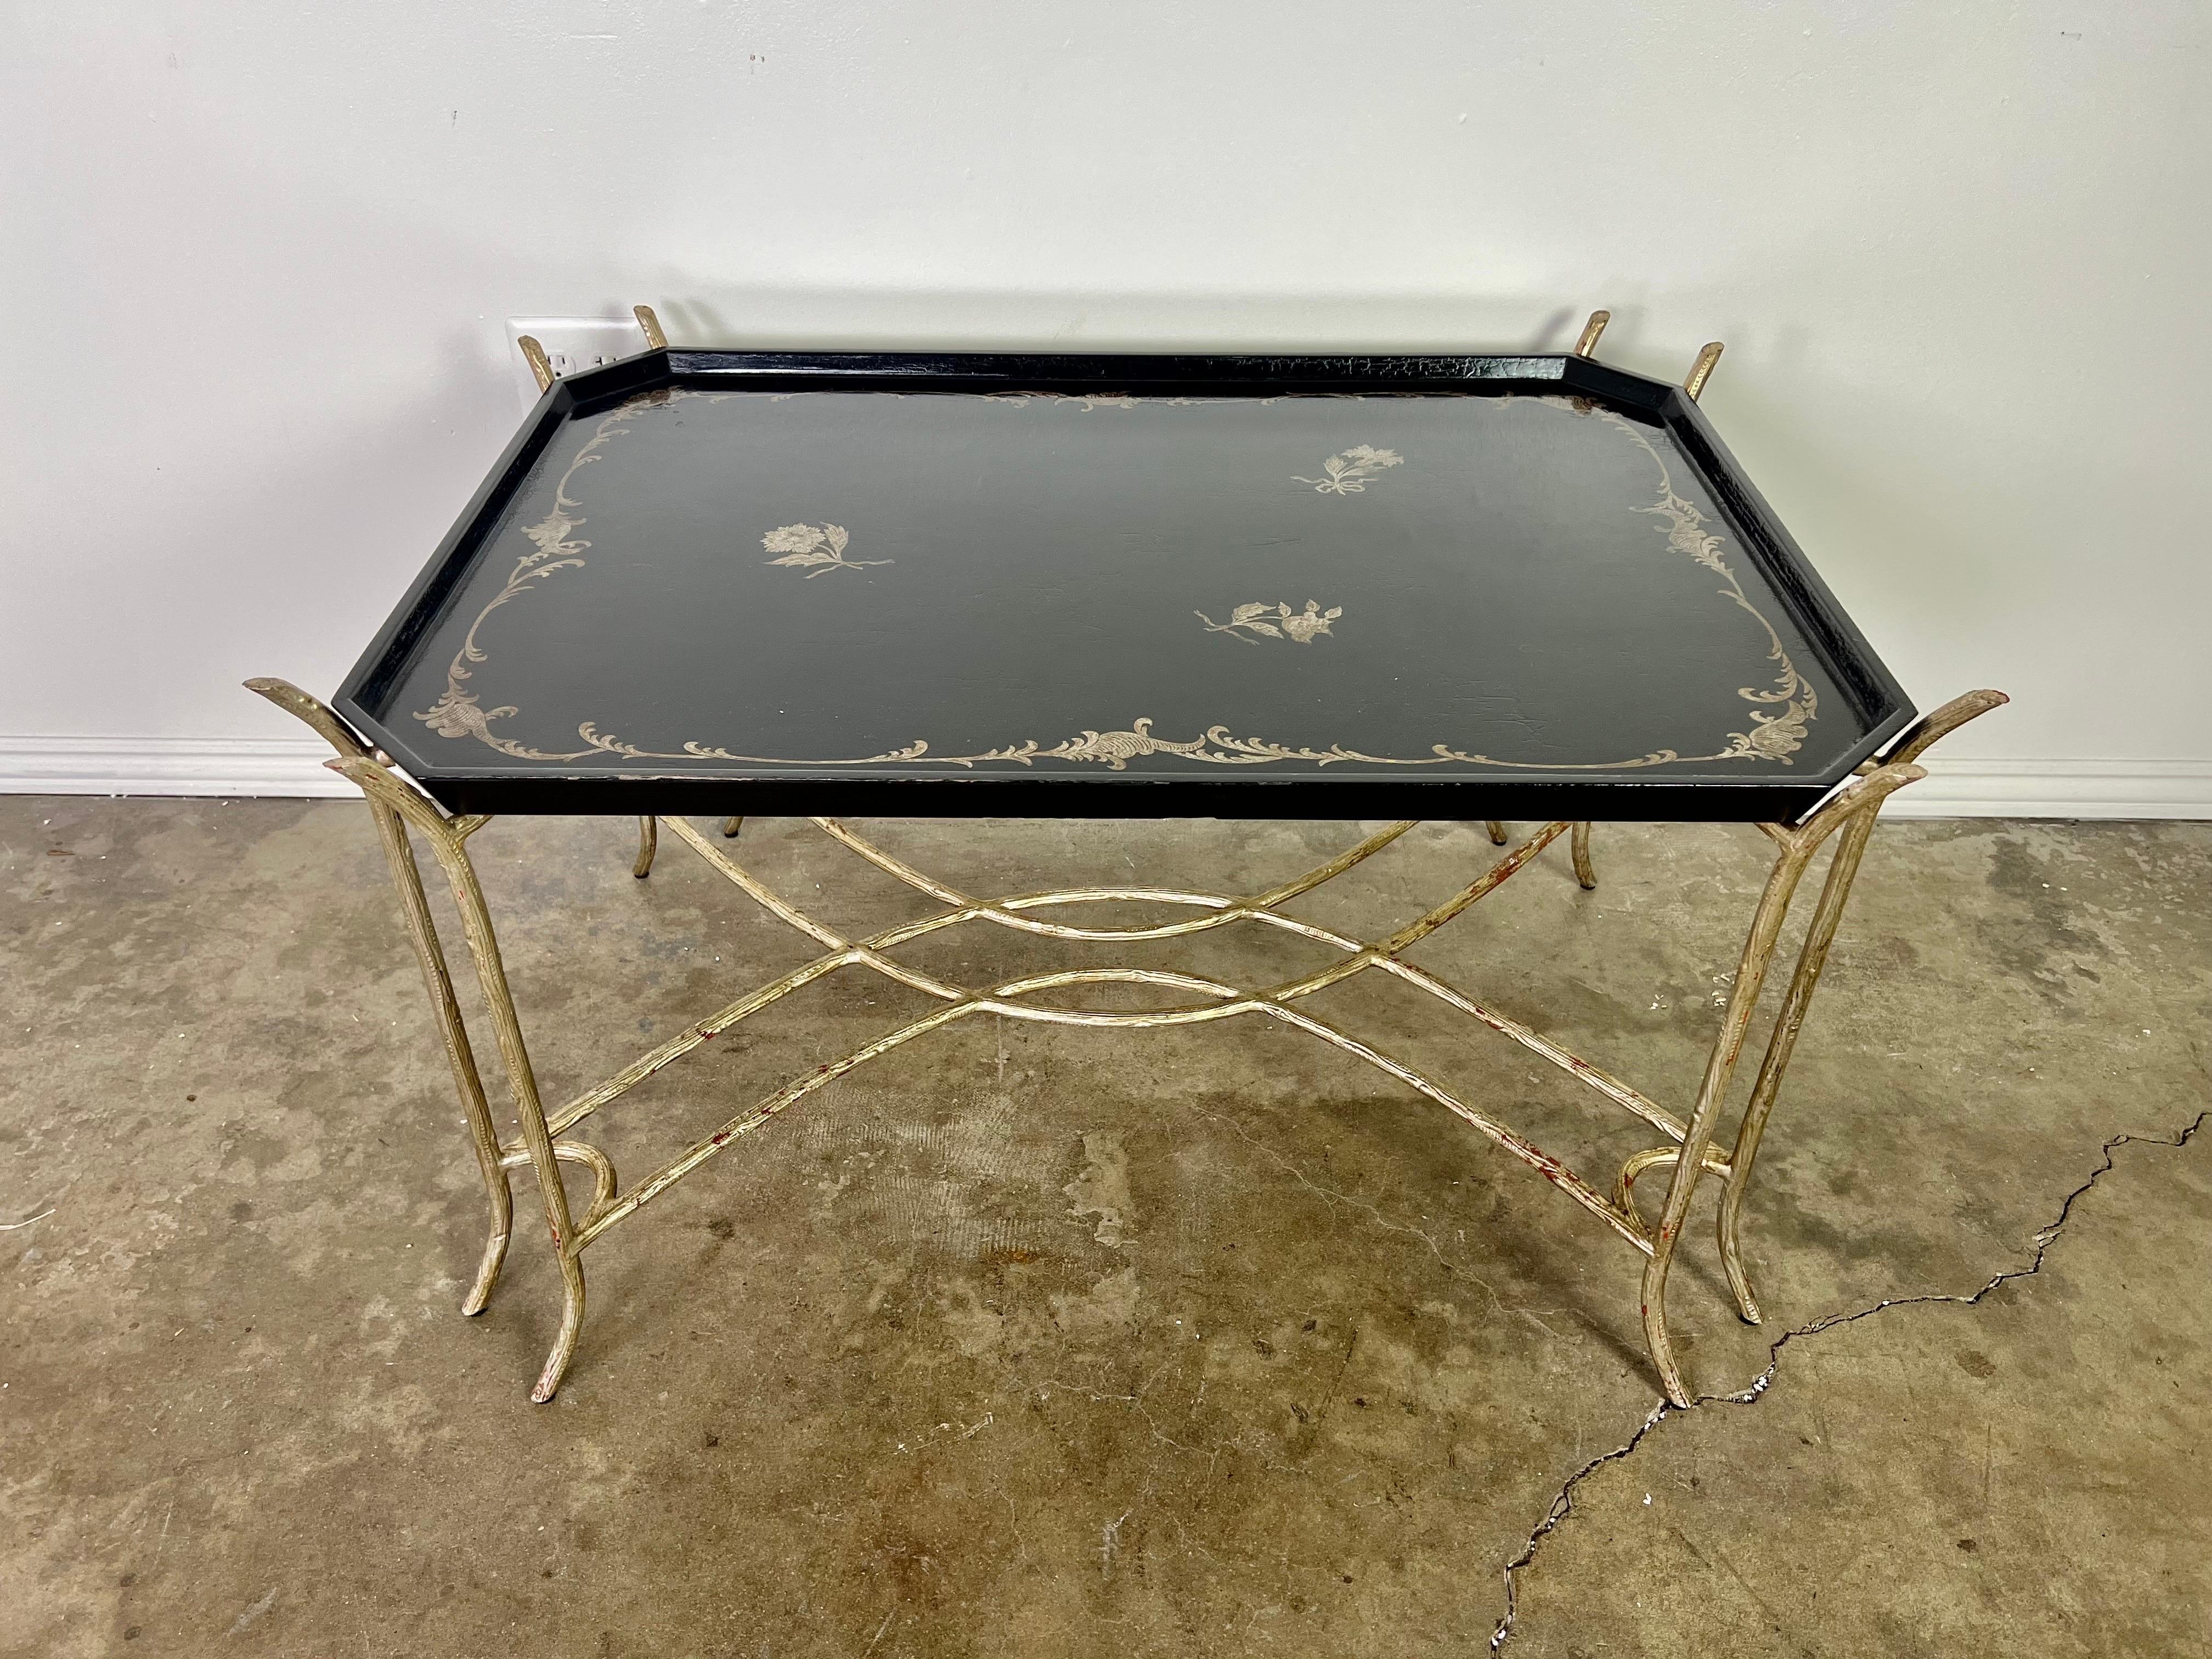 Chinoiserie Lacquered Tea Table on Metal Base by Ebanista For Sale 6